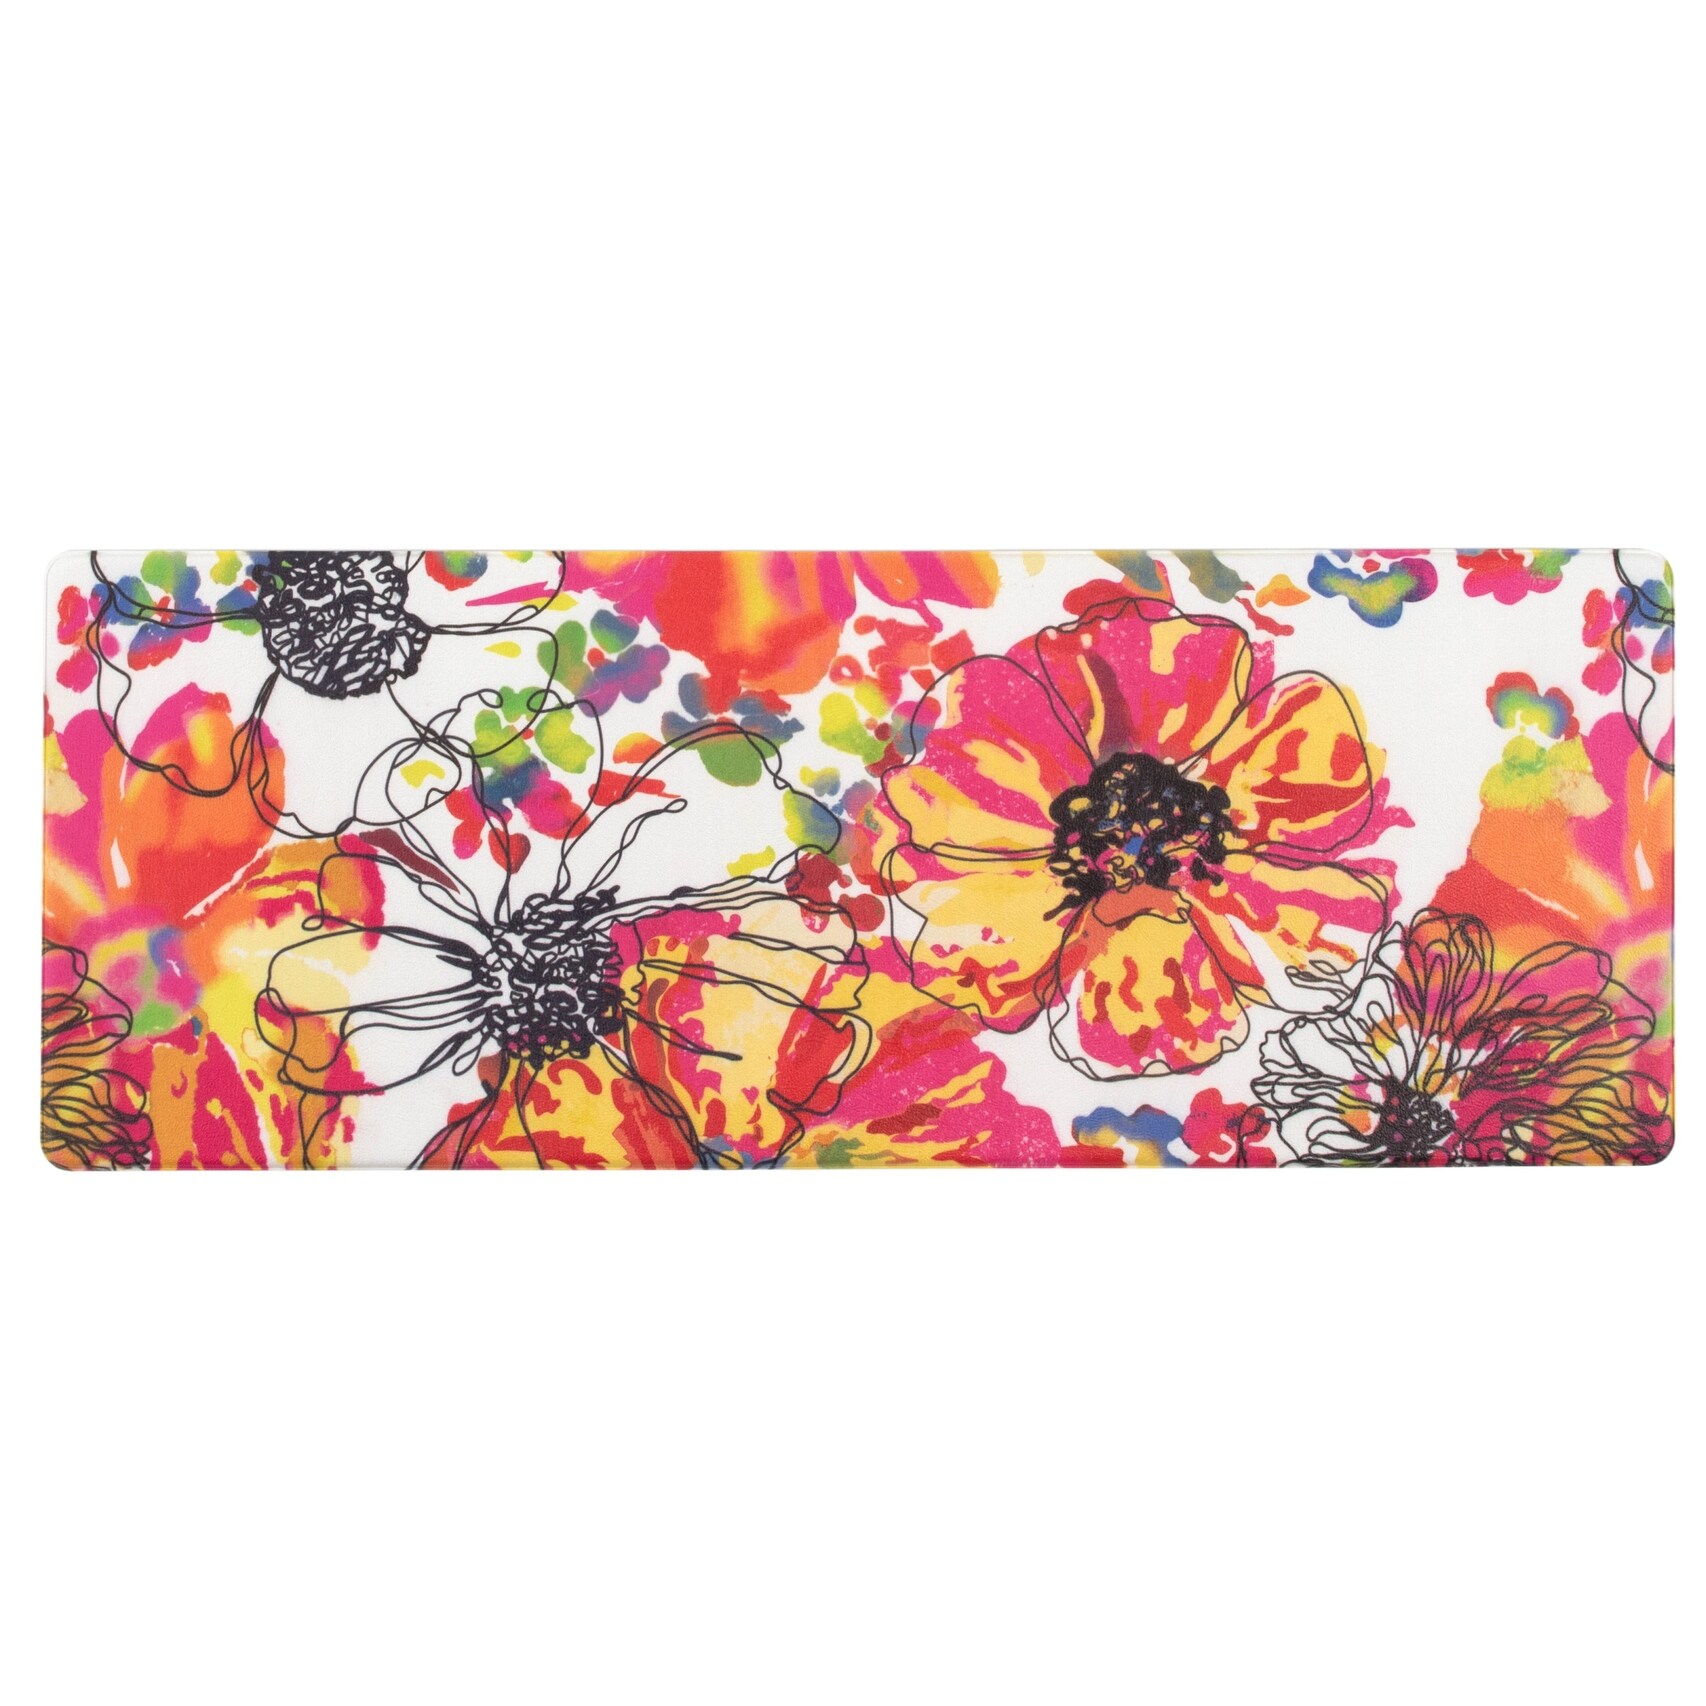 https://ak1.ostkcdn.com/images/products/is/images/direct/22cf1f1d447386f66af6dc3e2bb4ec8037303ac6/Modern-Bright-Flowers-Anti-Fatigue-Standing-Mat.jpg